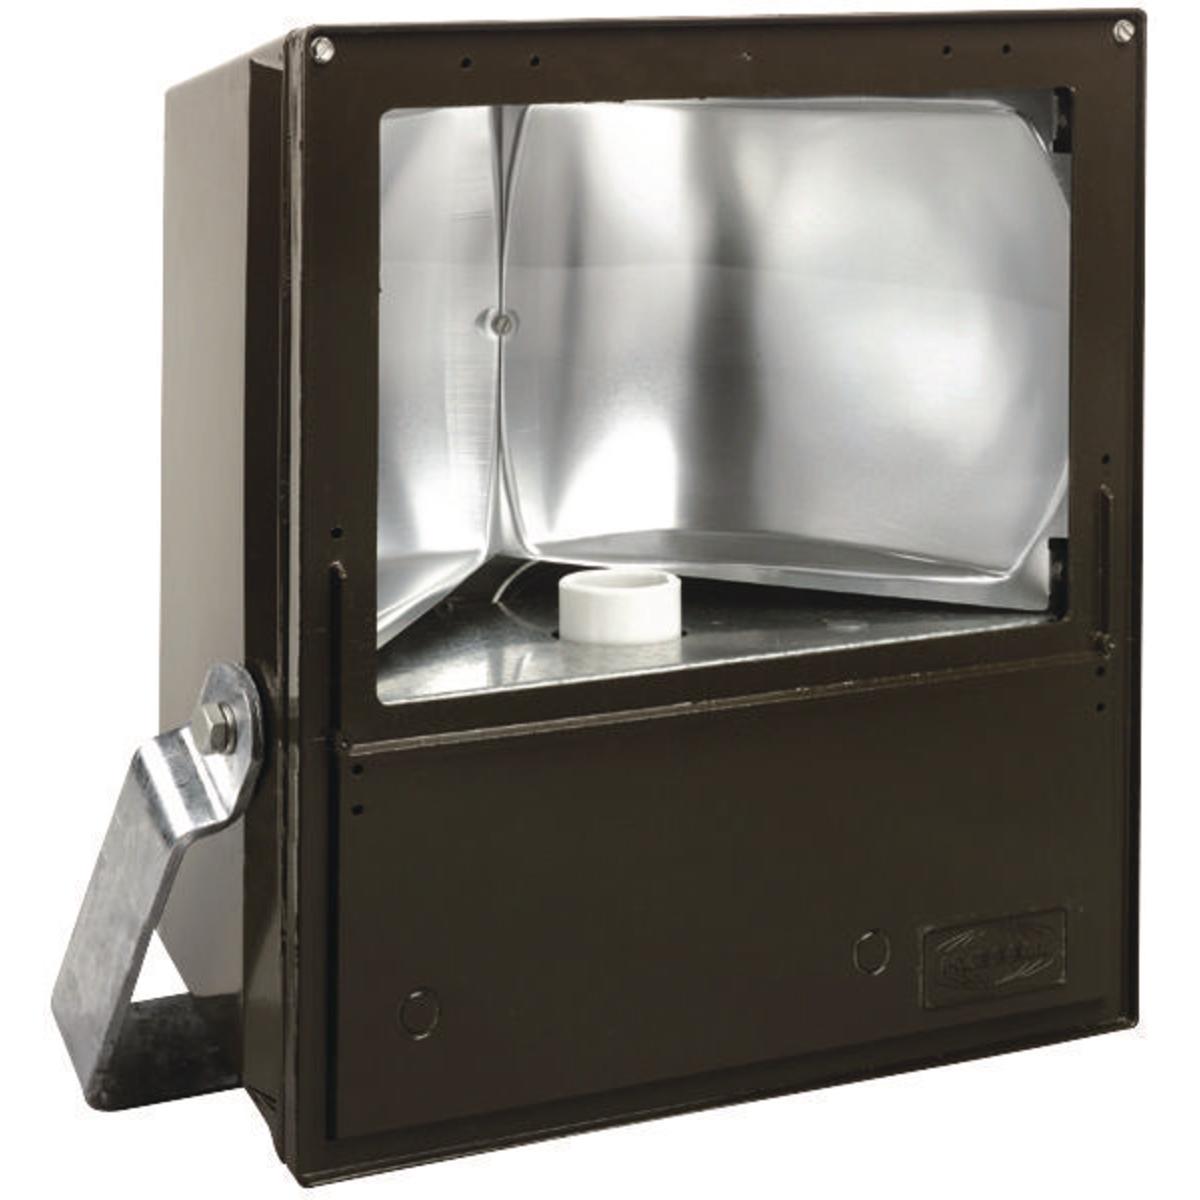 Hubbell KFS255-76 KF Series - Aluminum 250 Watt High Pressure Sodium Marine Floodlight(Lamp Not Included) - 480V At 60Hz  ; Rugged weathertight housing of copperfree aluminum with corrosion resistant bronze finish ; Wide beam distribution ; Thermal shock, impact-resistant 